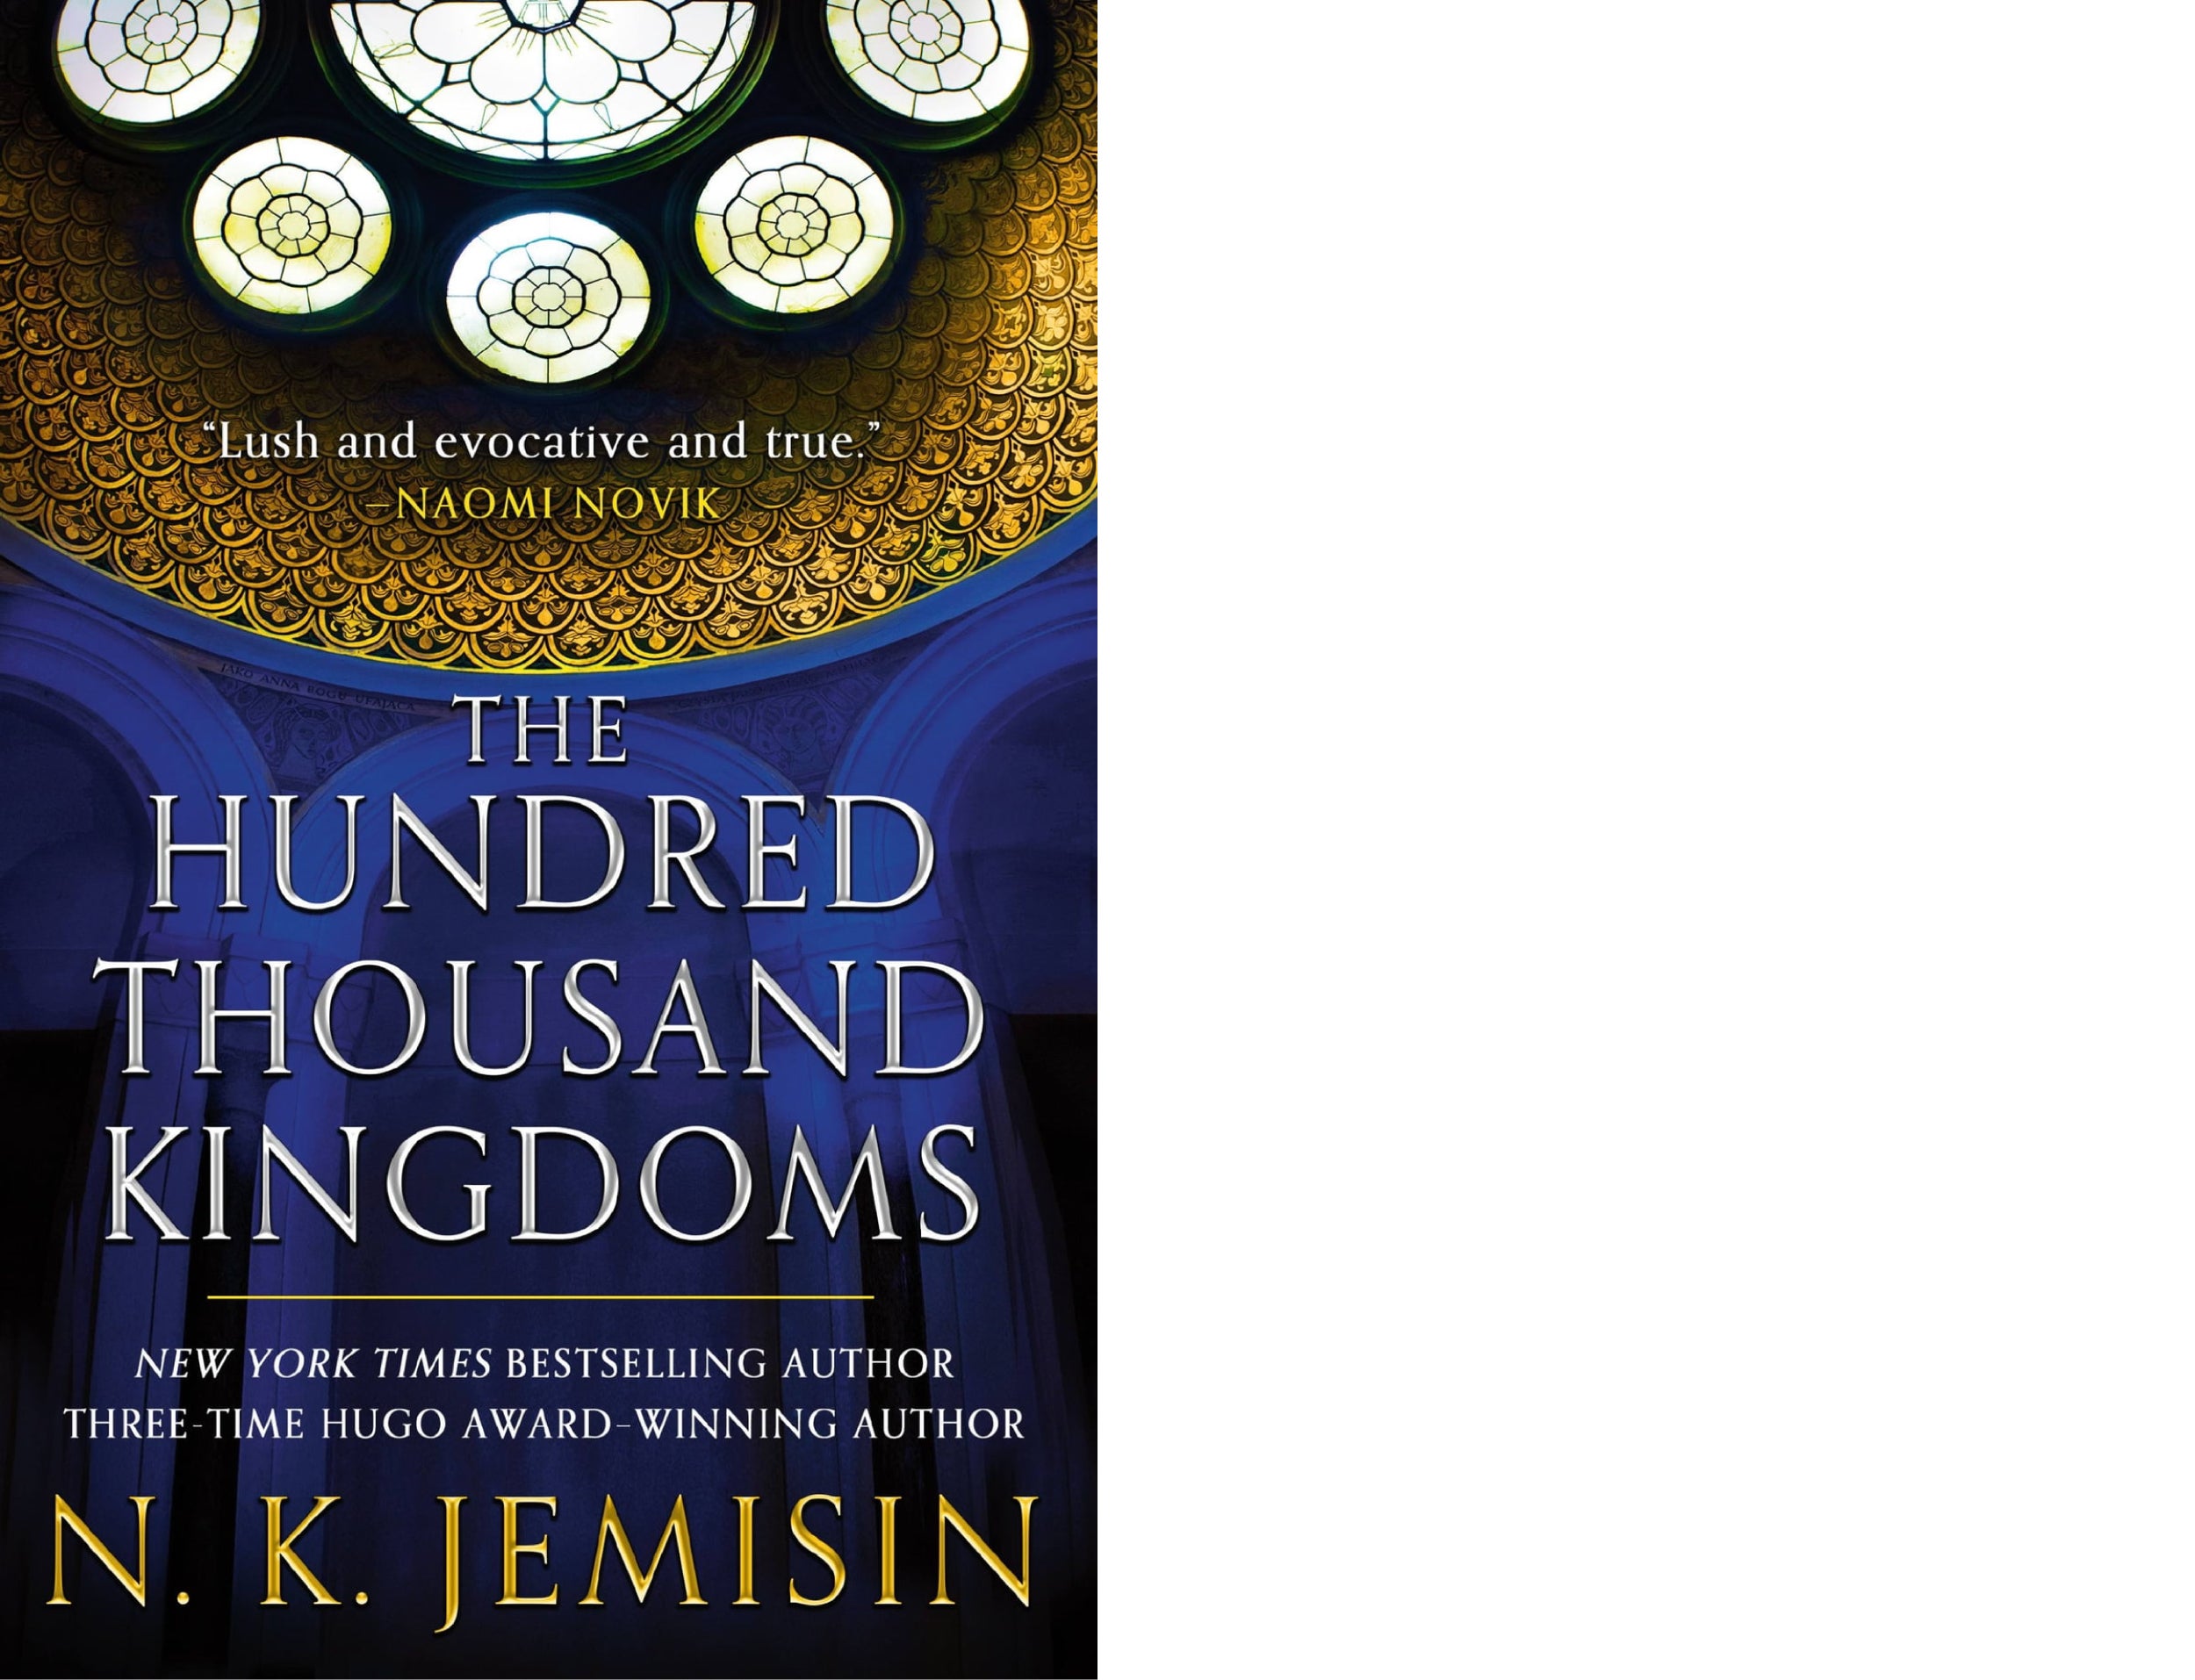 Book cover: "The Hundred Thousand Kingdoms."